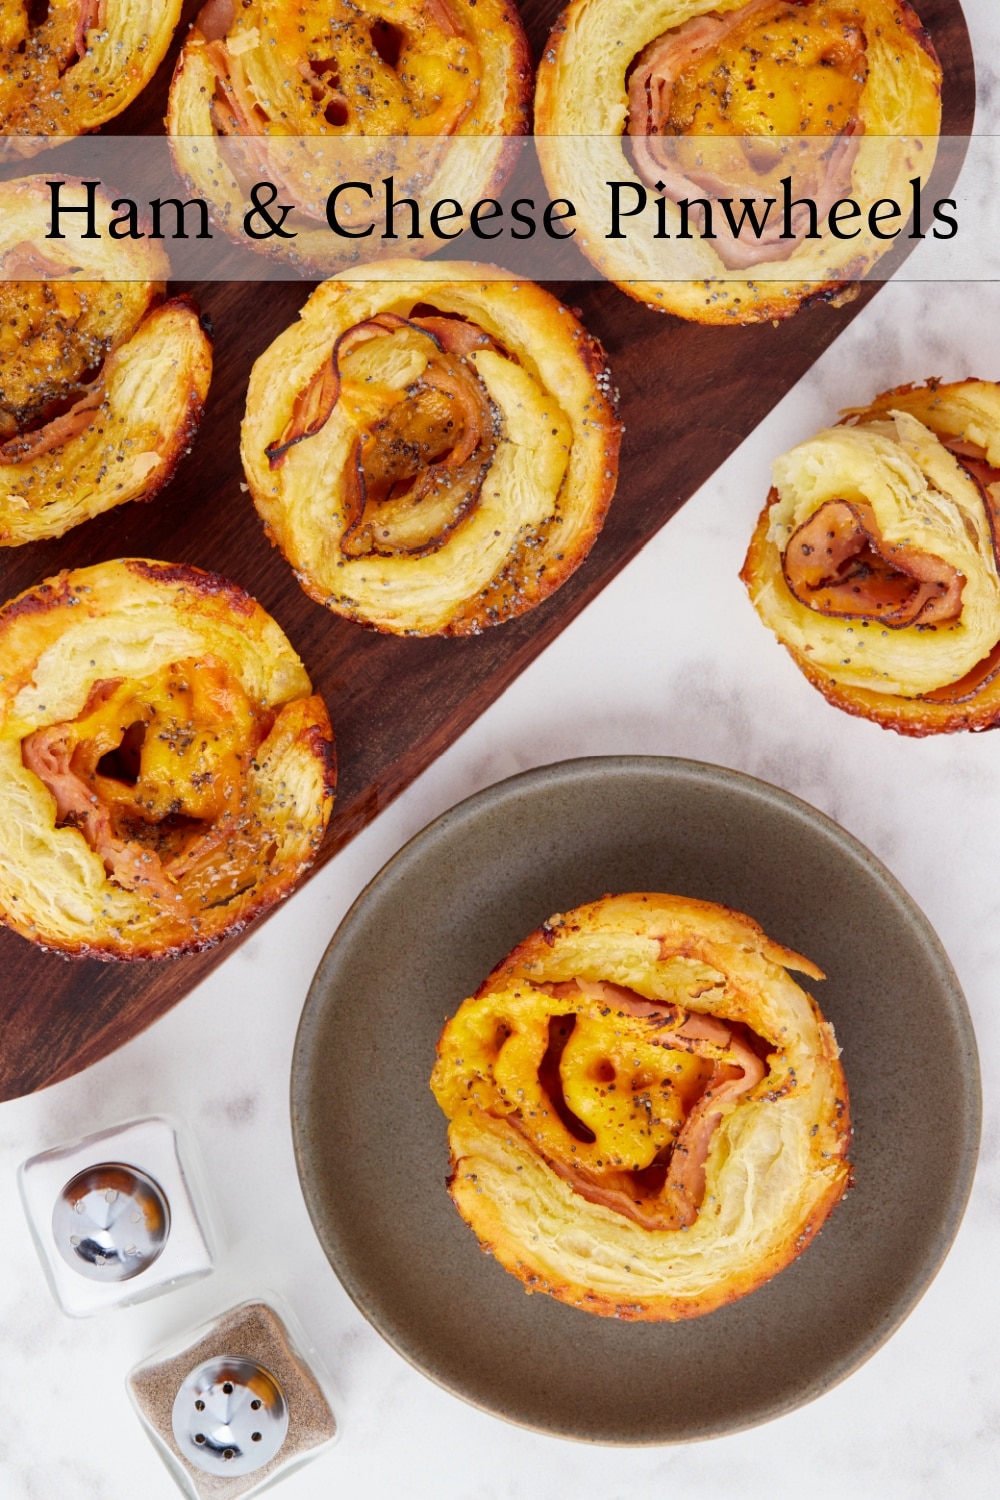 Transform your traditional appetizer pinwheels with this irresistible ham and cheese version. Experience the perfect balance of savory and slightly-sweet flavors with every bite. These pinwheels are flaky, buttery in the center, and crisp on the edges for the ultimate flavor and texture. Don't settle for flat-looking appetizers again, try this delicious twist on the classic pinwheel sandwich. via @cmpollak1